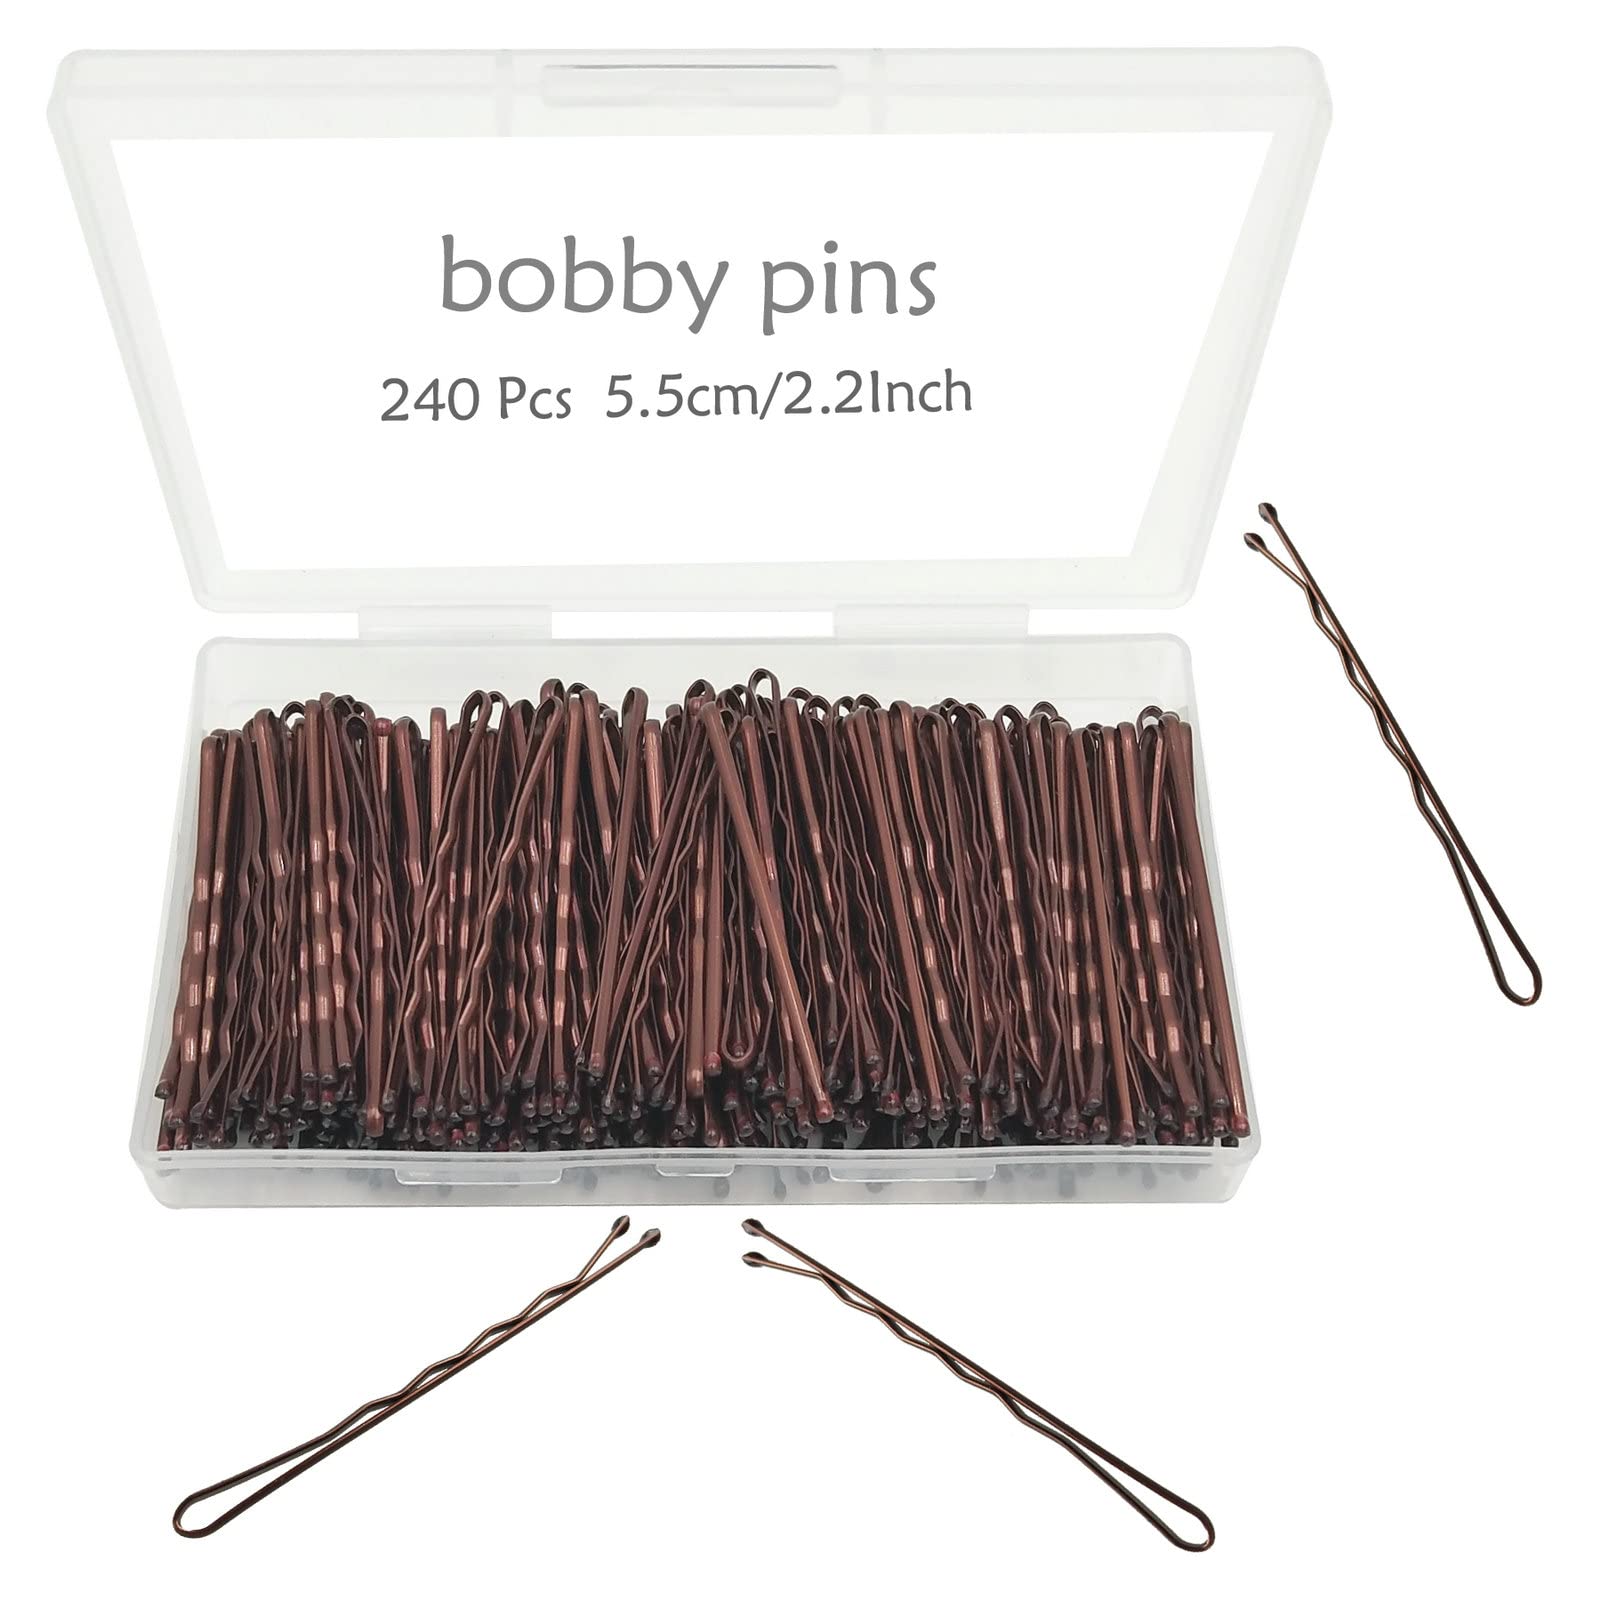 bobby pins brown, 240-Count hair pins with Cute Box, Premium bobby pin for  Kids, Girls